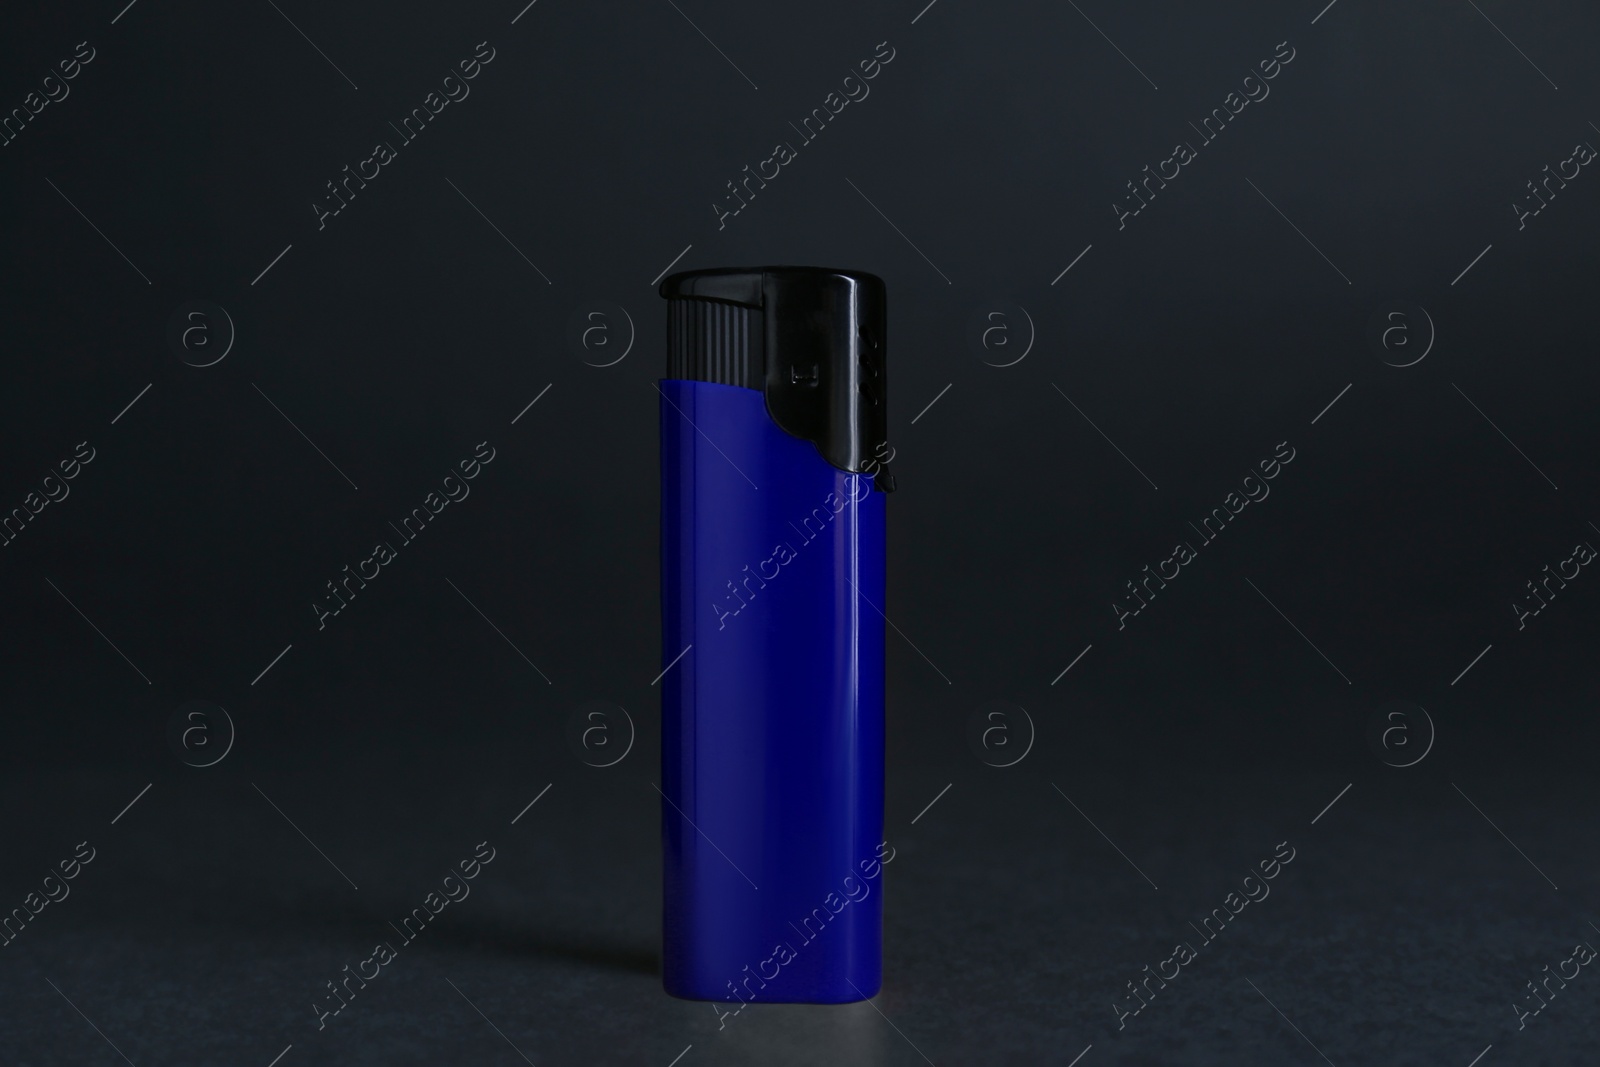 Photo of Stylish small pocket lighter on wooden table against black background